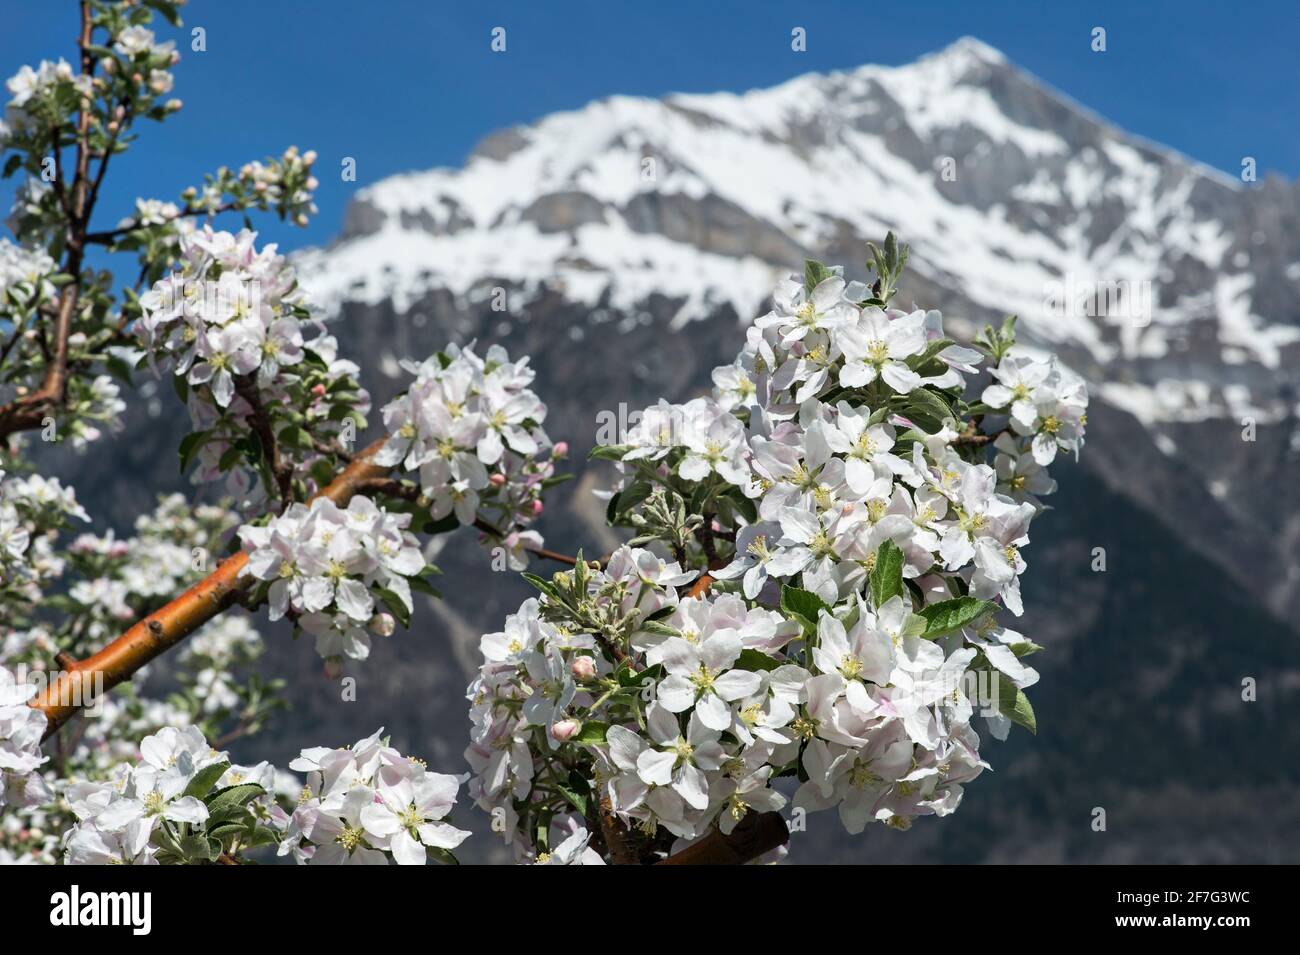 Blooming branch of an apple tree, Fully, Valais, Switzerland Stock Photo